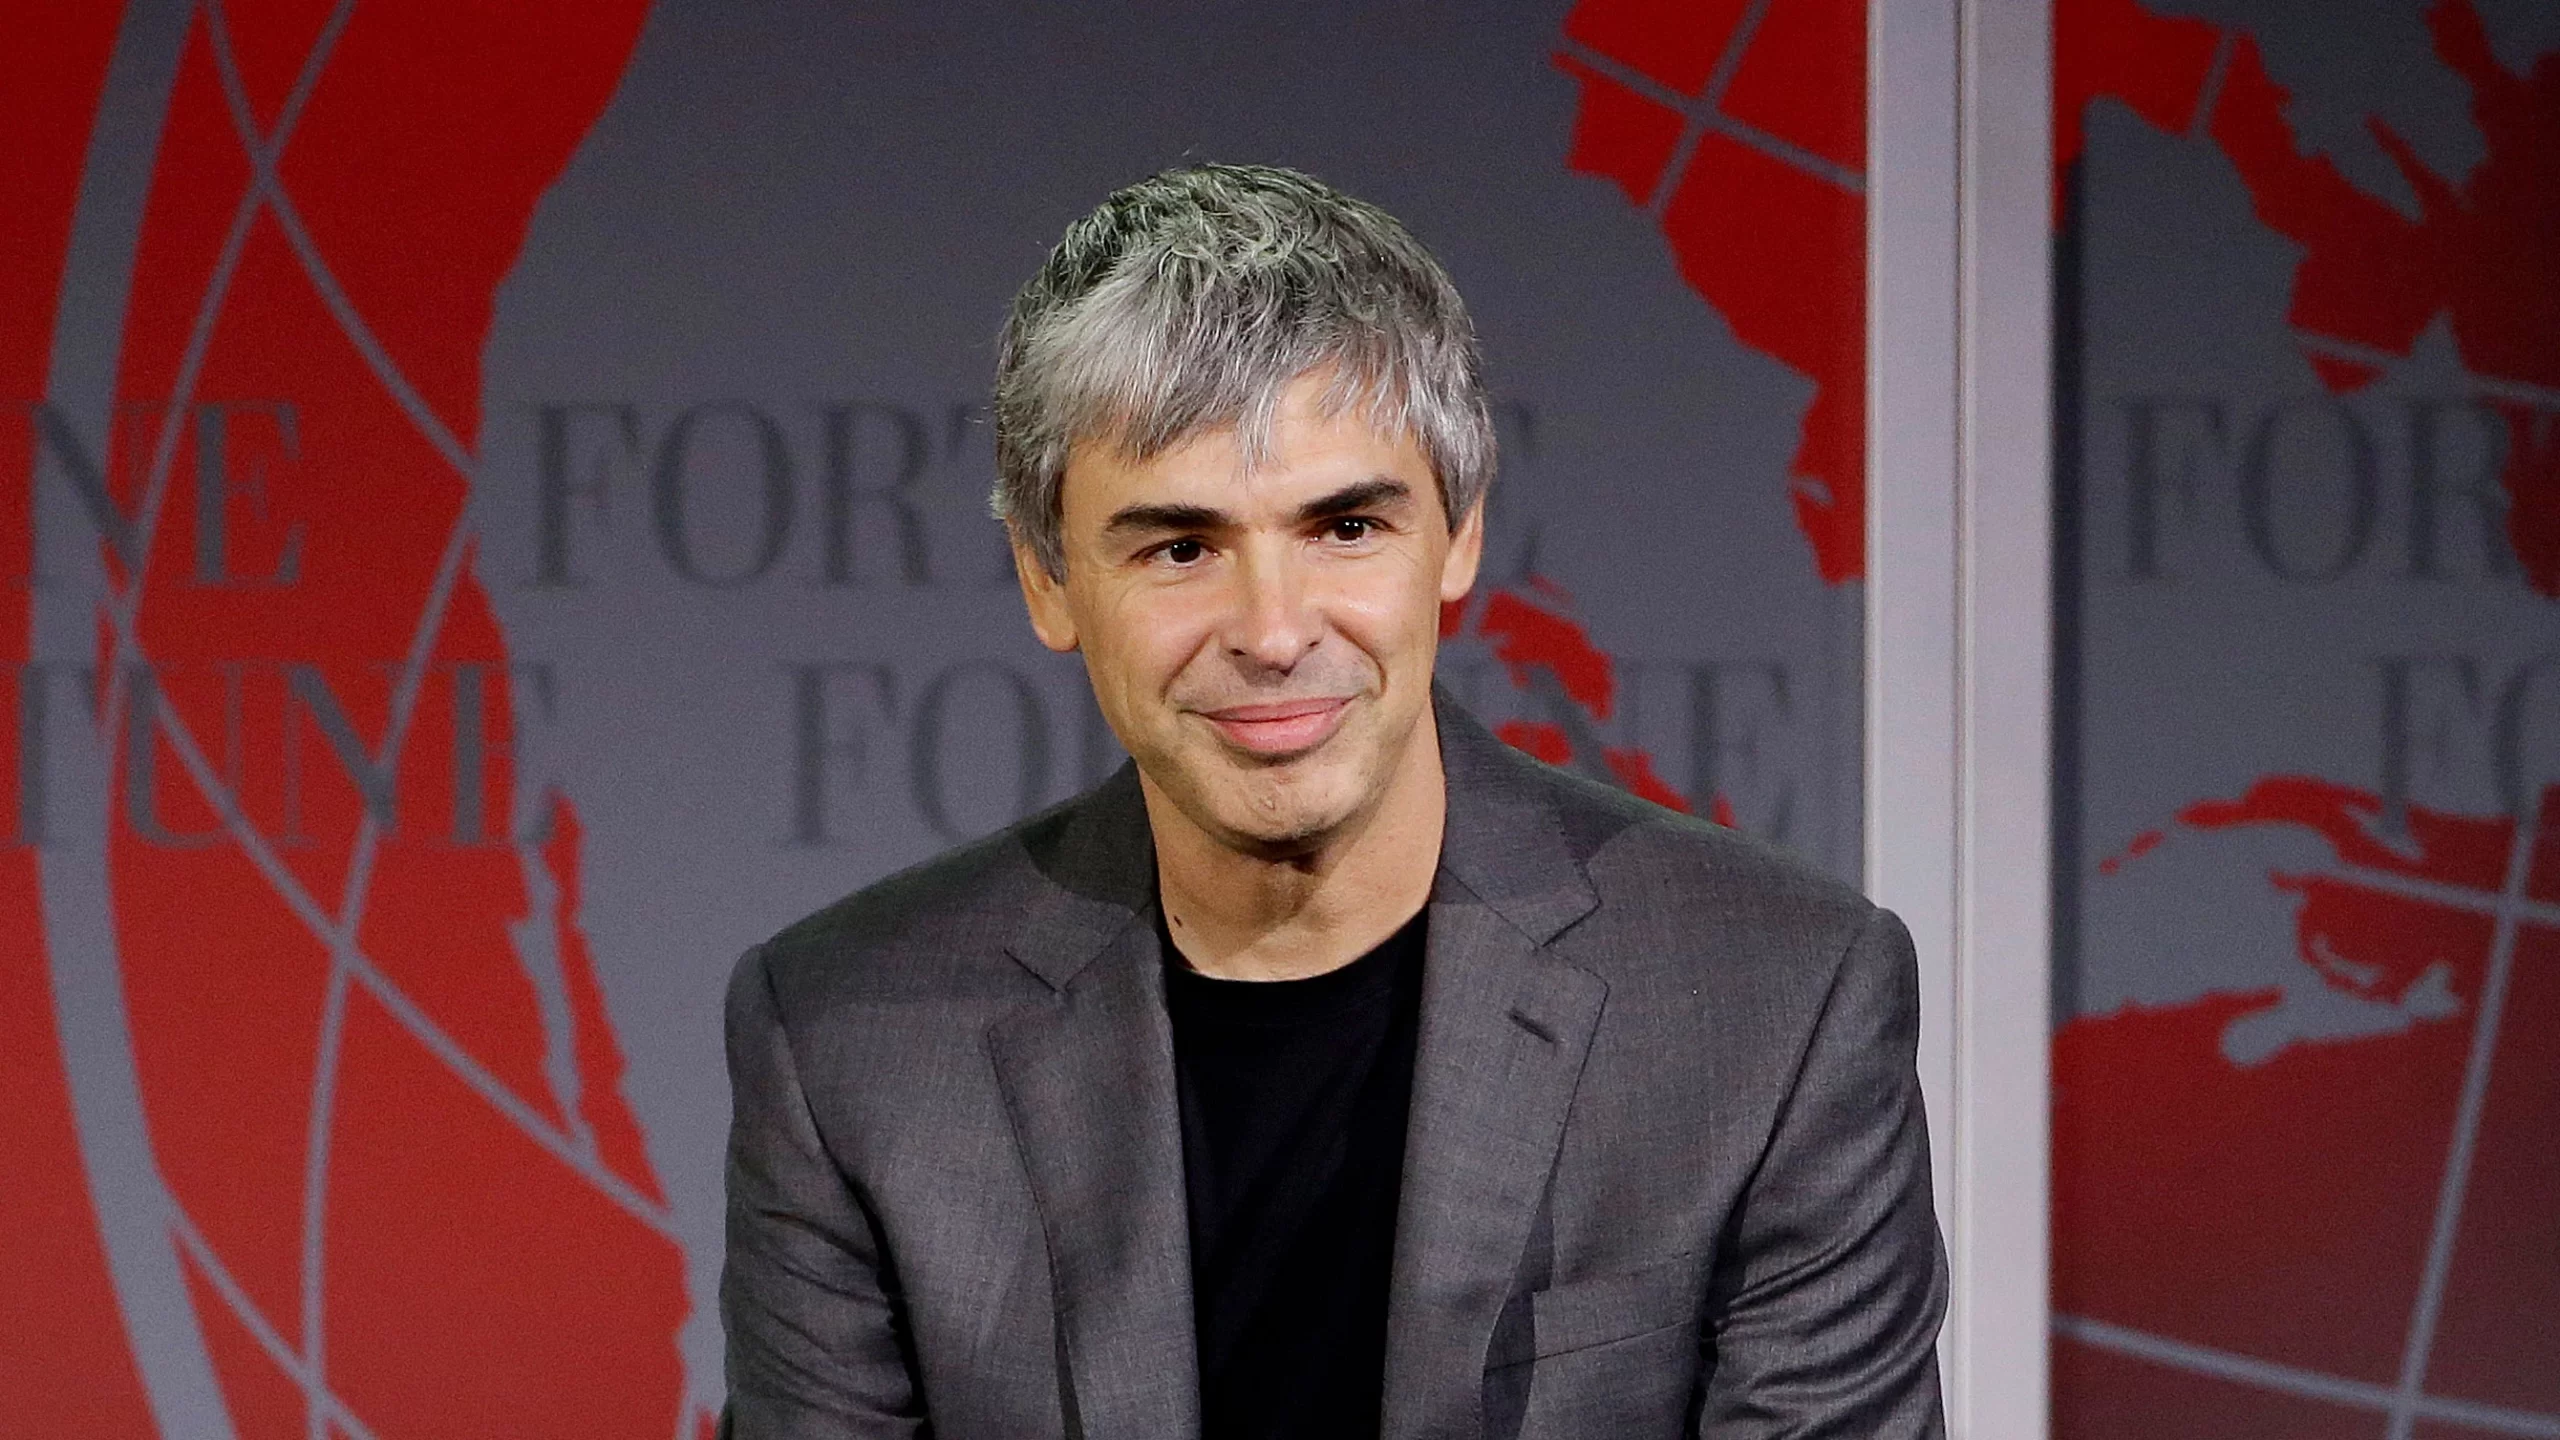 10 Billionaires Who Dropped out of College To Build A Fortune: Larry Page